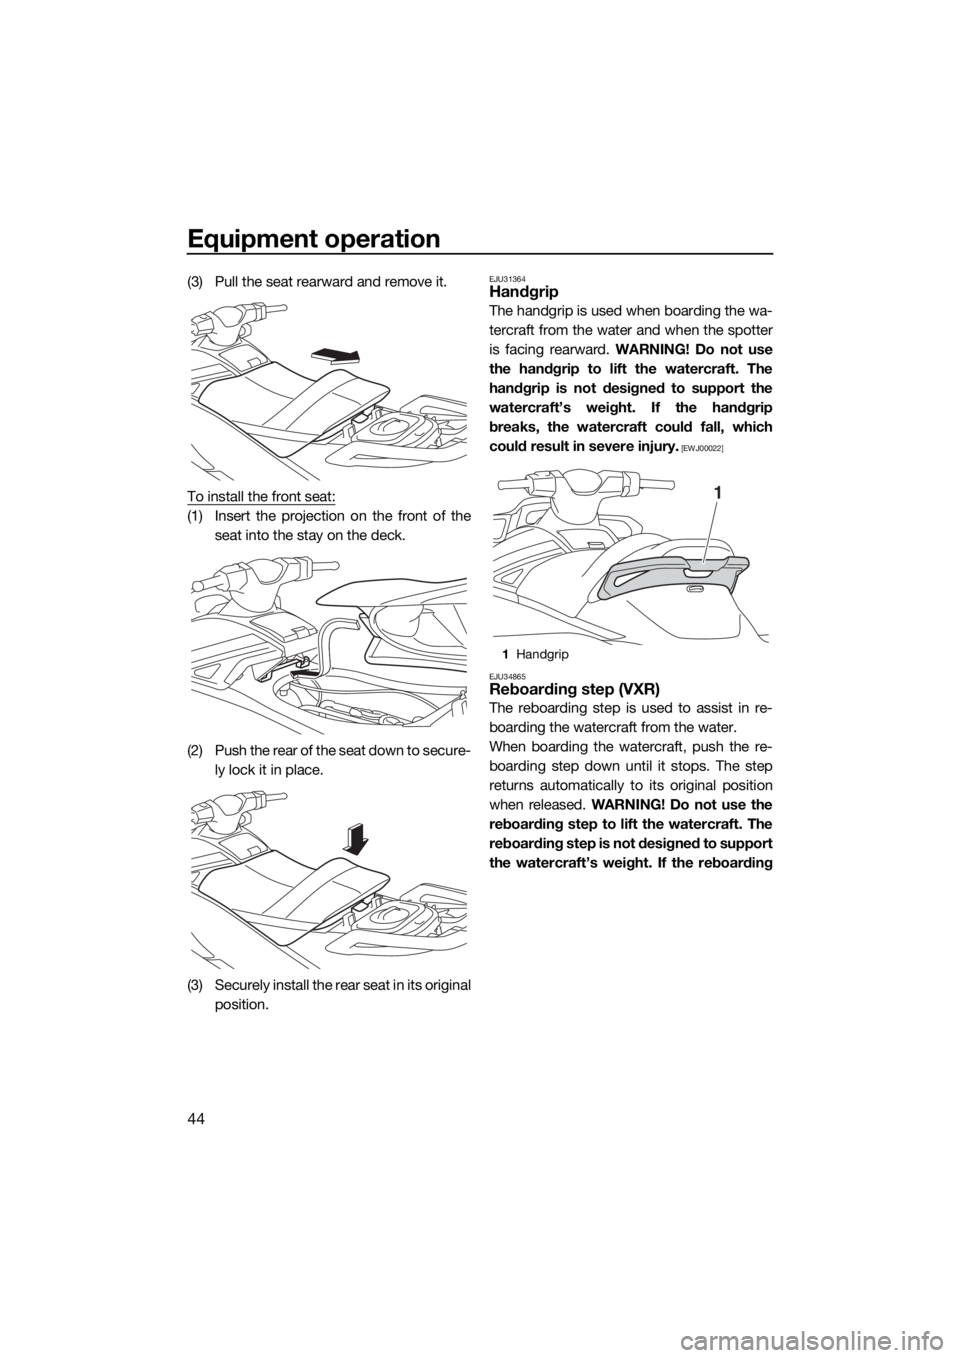 YAMAHA VXR 2015 Service Manual Equipment operation
44
(3) Pull the seat rearward and remove it.
To install the front seat:
(1) Insert the projection on the front of the
seat into the stay on the deck.
(2) Push the rear of the seat 